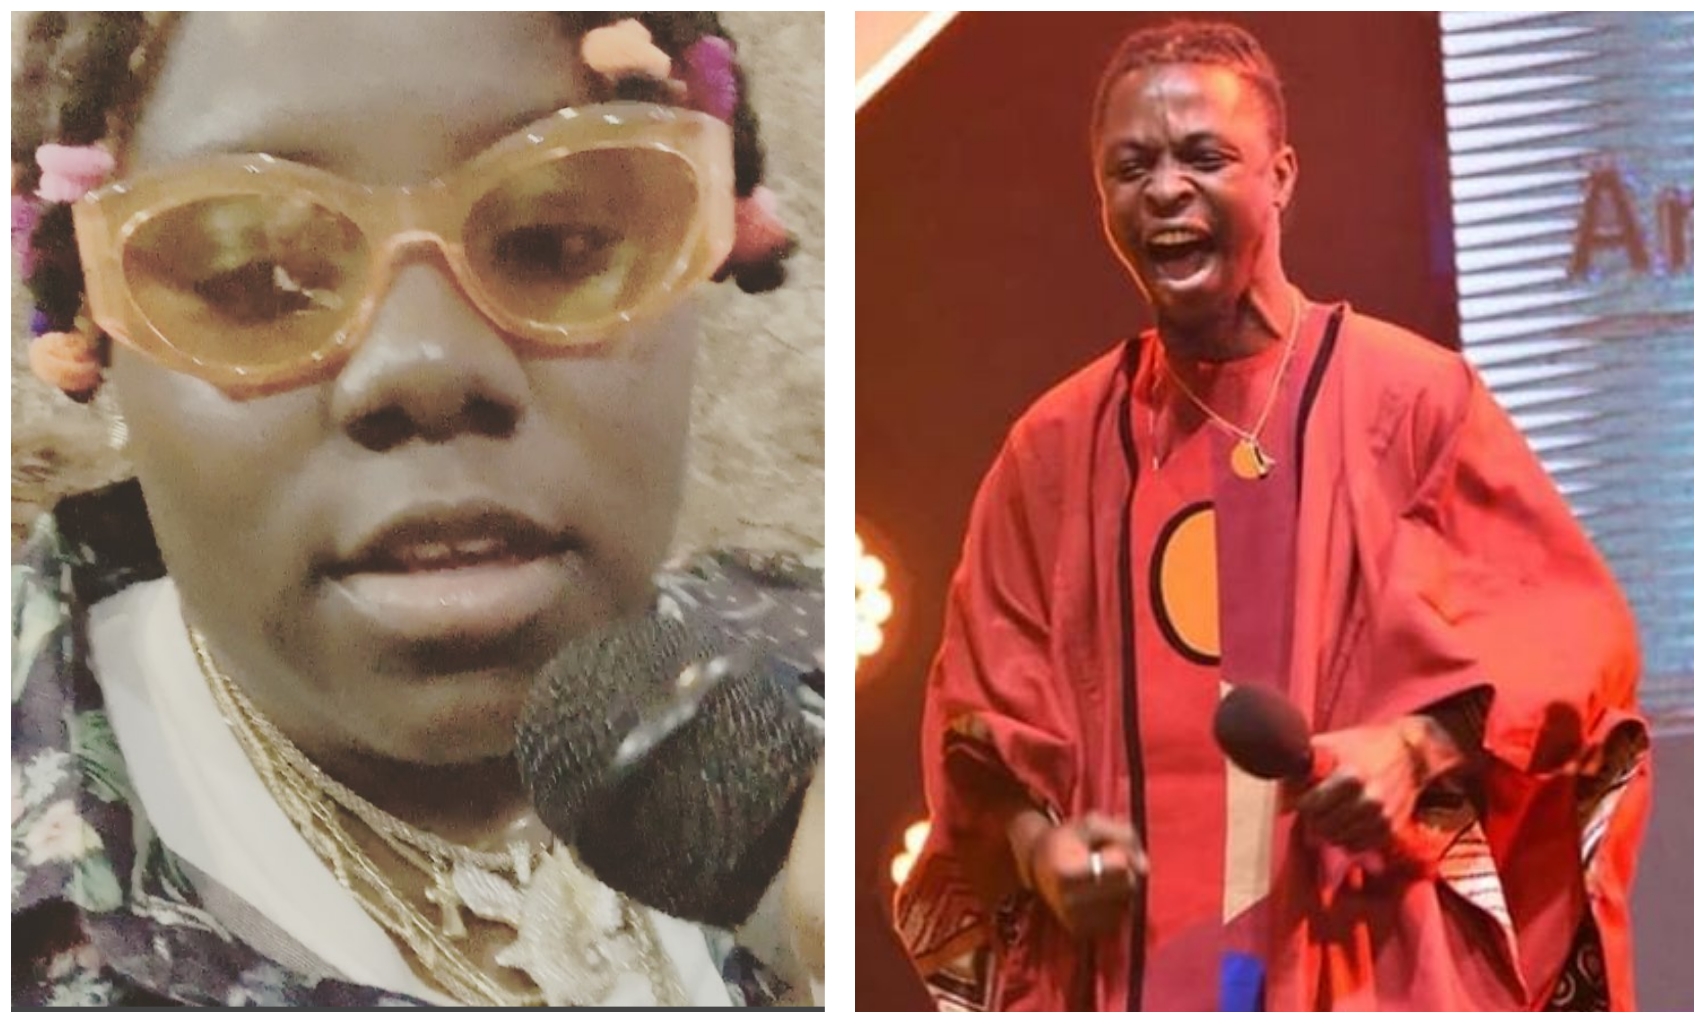 #BBNaija: Watch Teni's strong message to haters after Laycon's victory (Video)